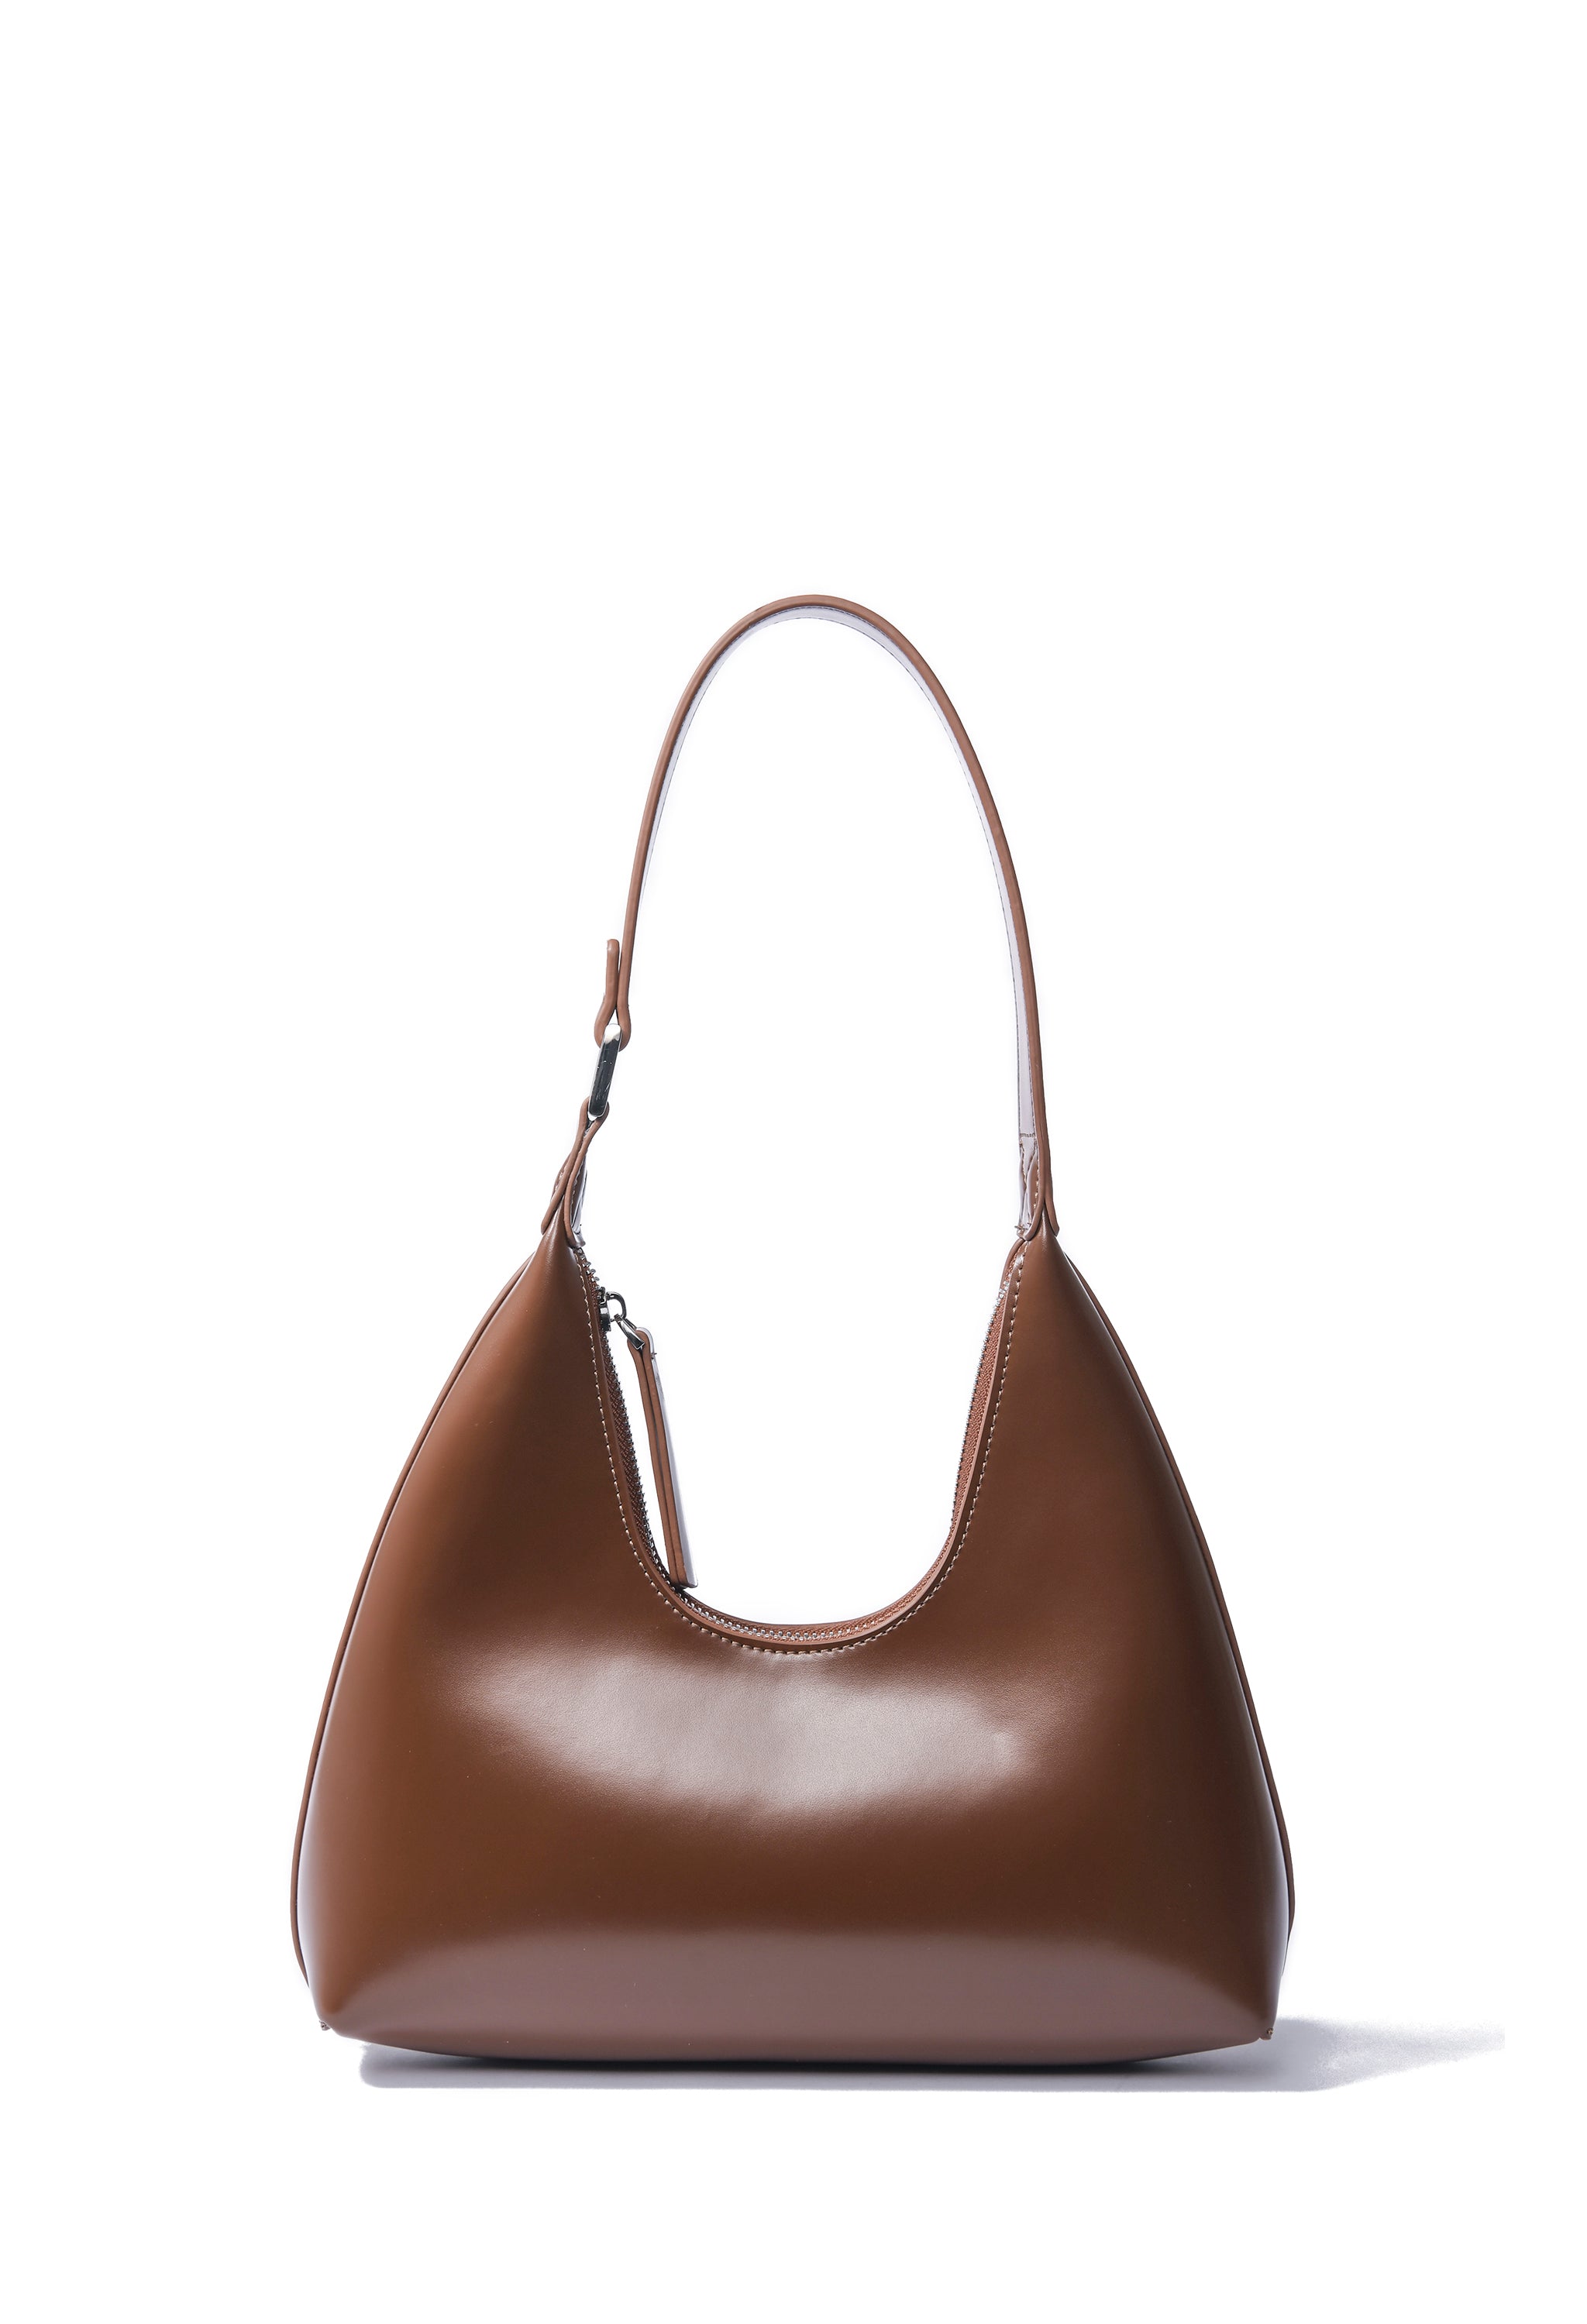 Alexia Bag in smooth leather, Caramel